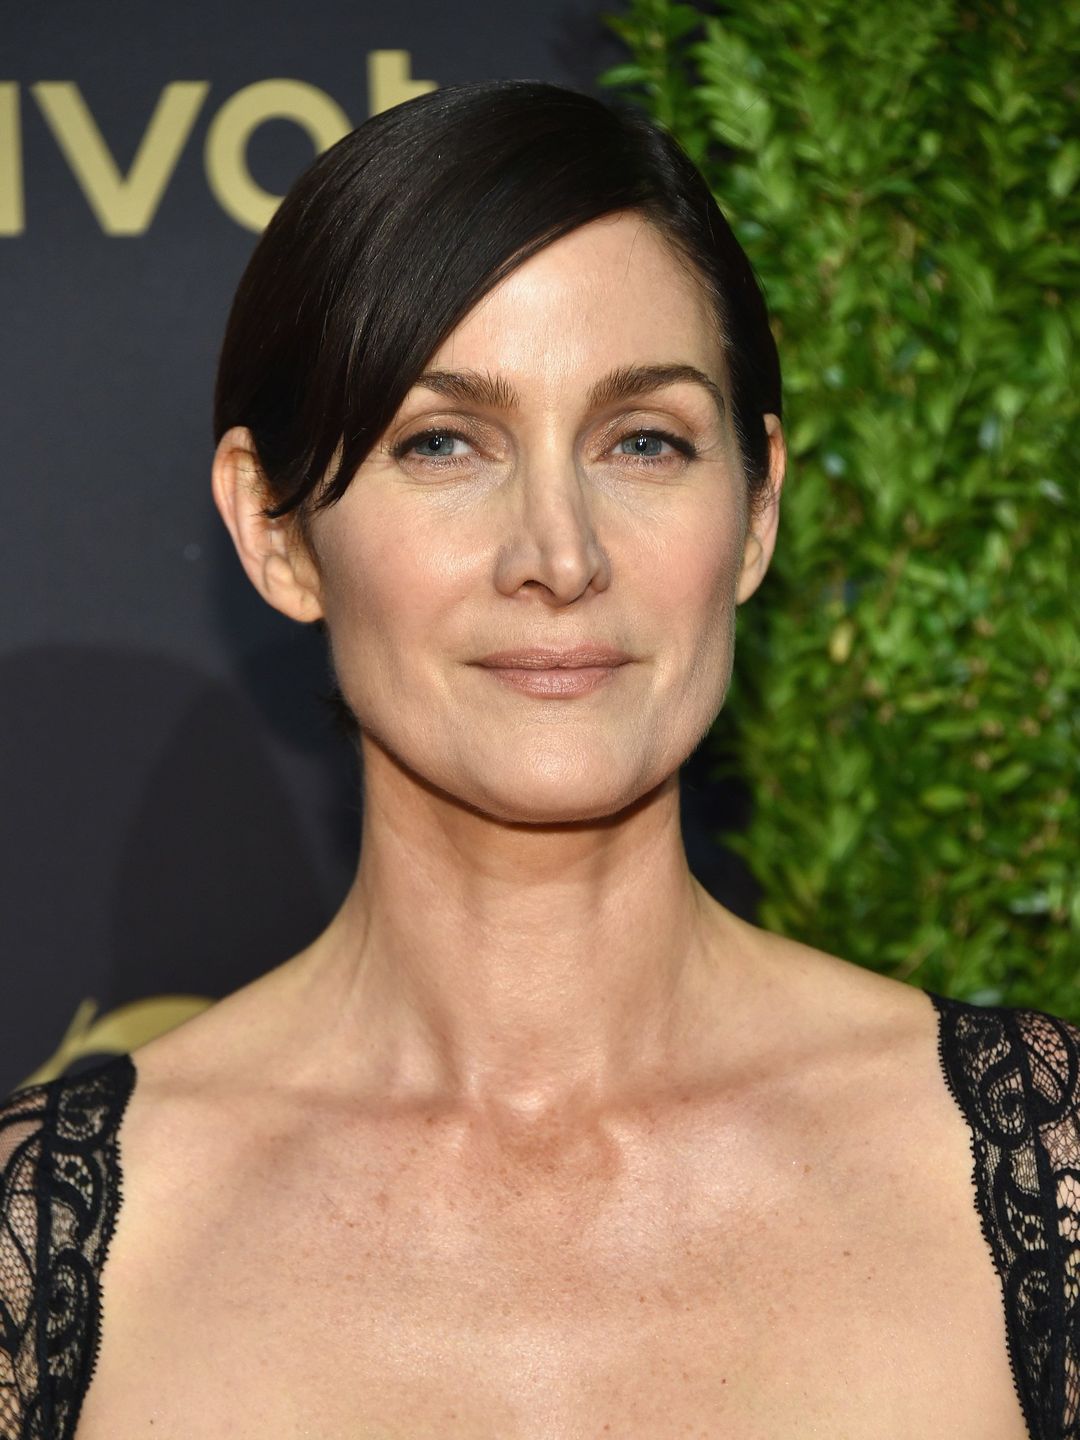 Carrie-Anne Moss chinese horoscope